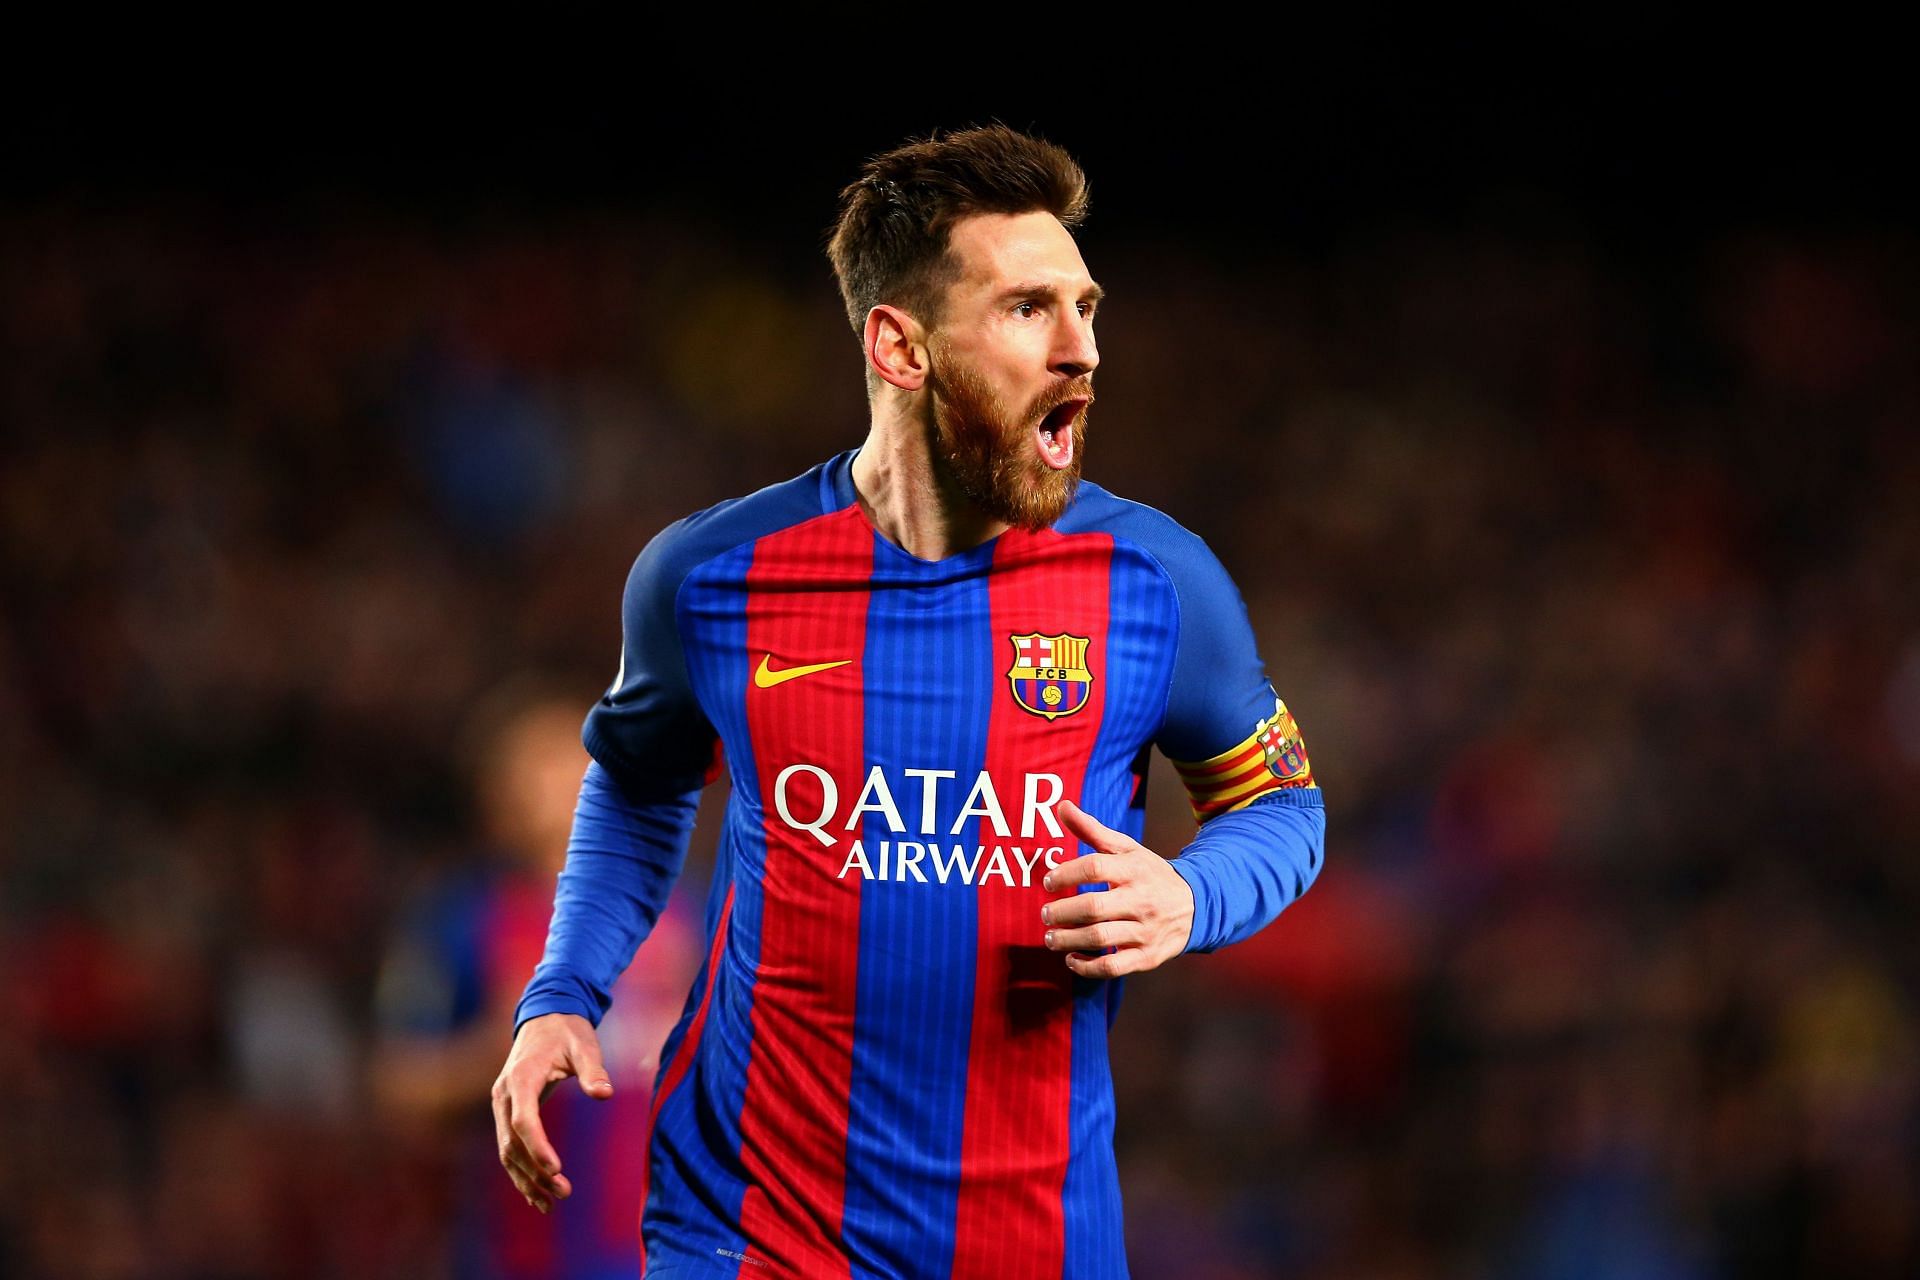 Lionel Messi has been, arguably, the greatest modern striker in Spanish football